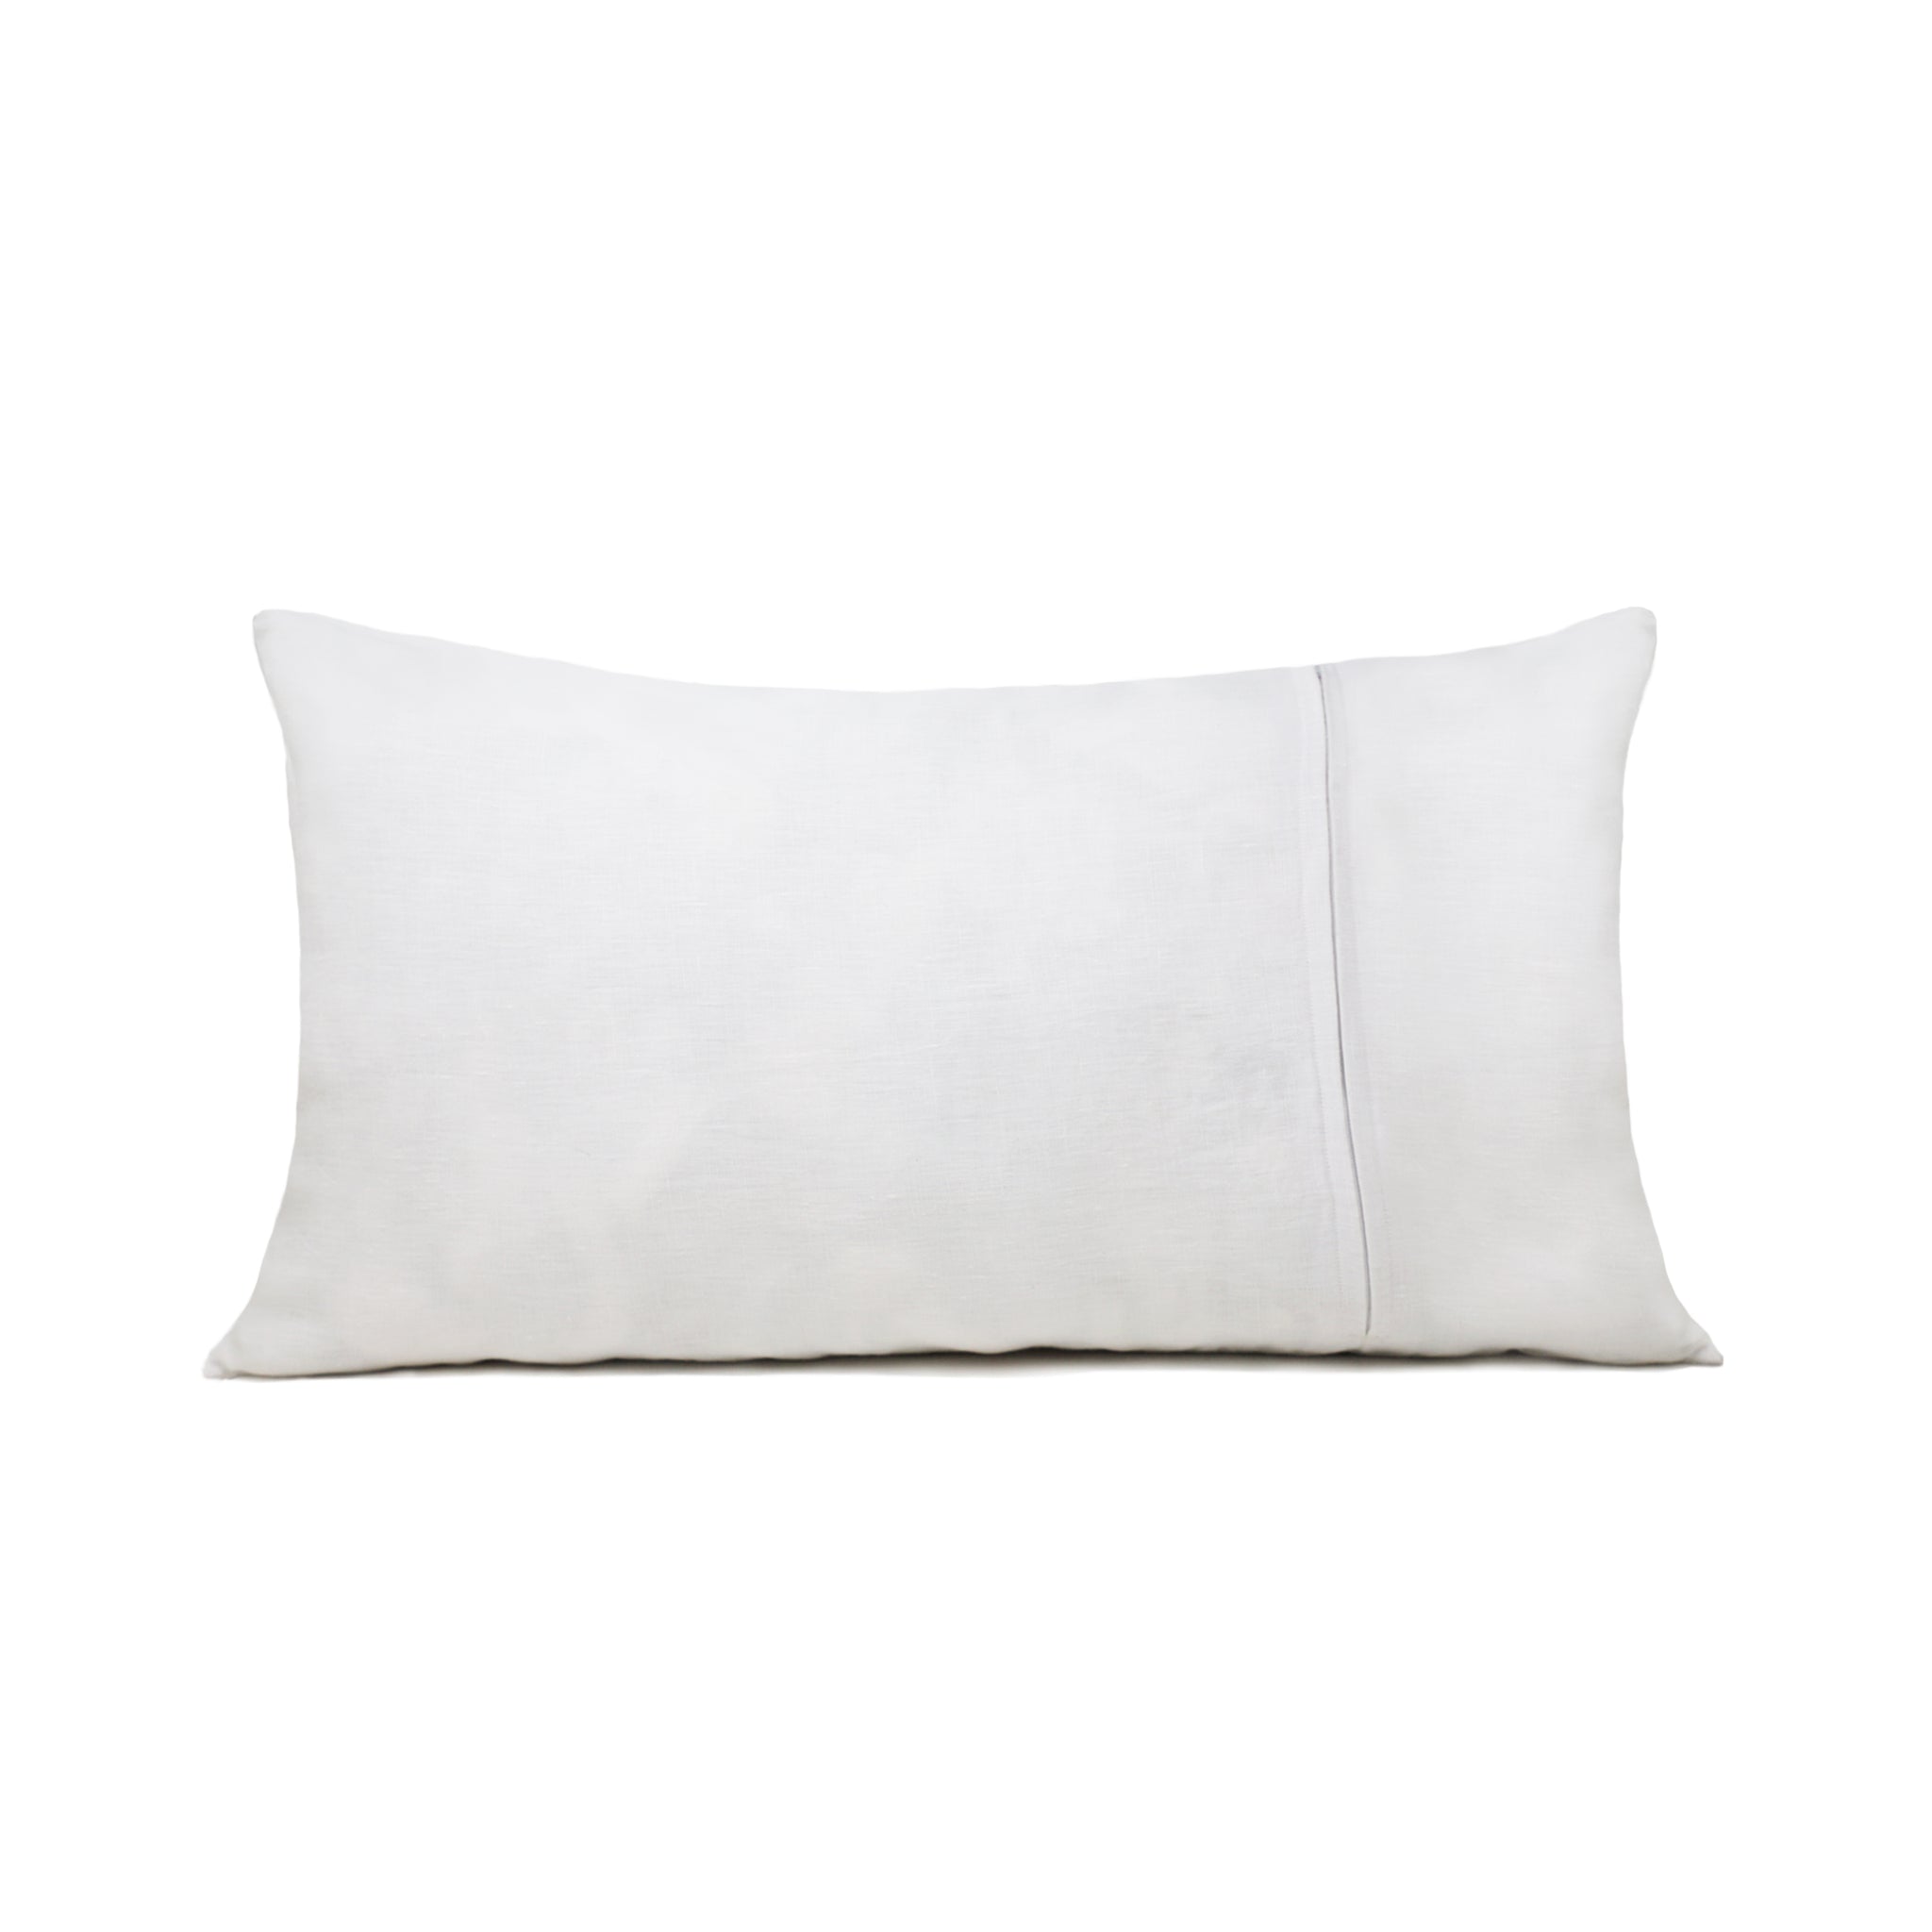 White Linen Pillowcase with Corner Embroidery – Linen and Letters